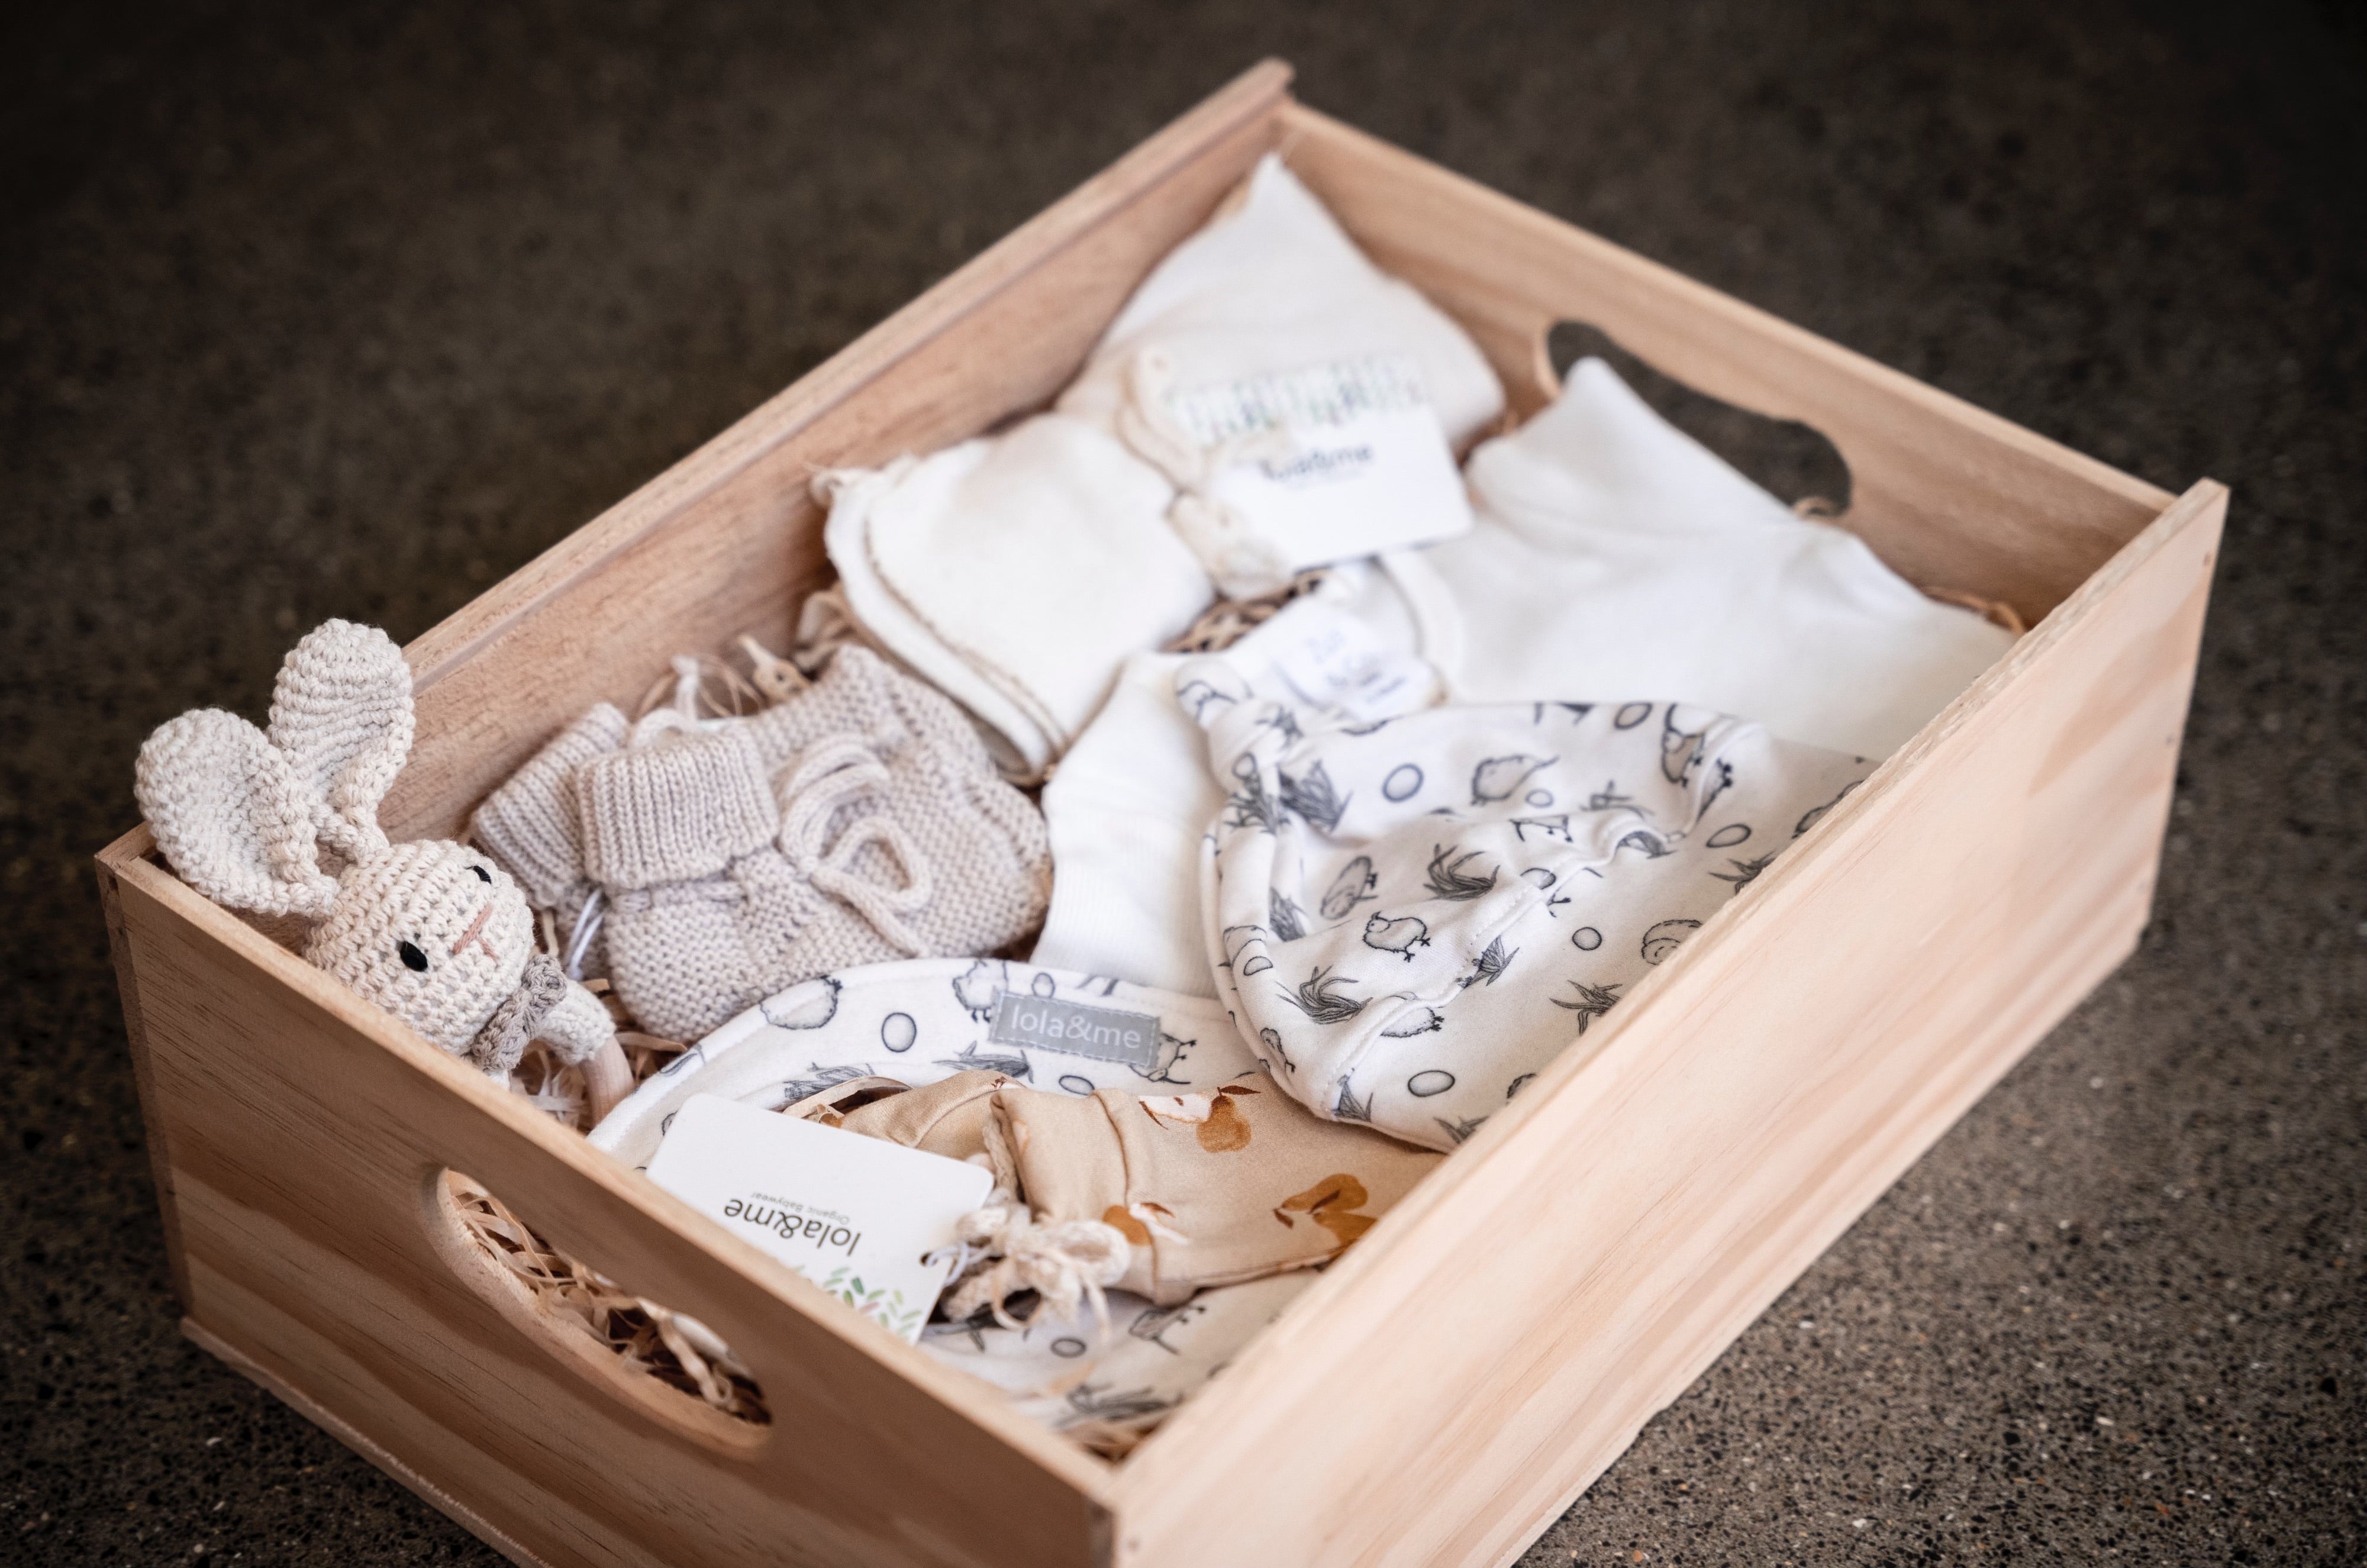 A neatly organized New Arrival baby memory box from giftbox co. filled with organic cloths and merino knit booties, cherishing the early moments of a child's life.